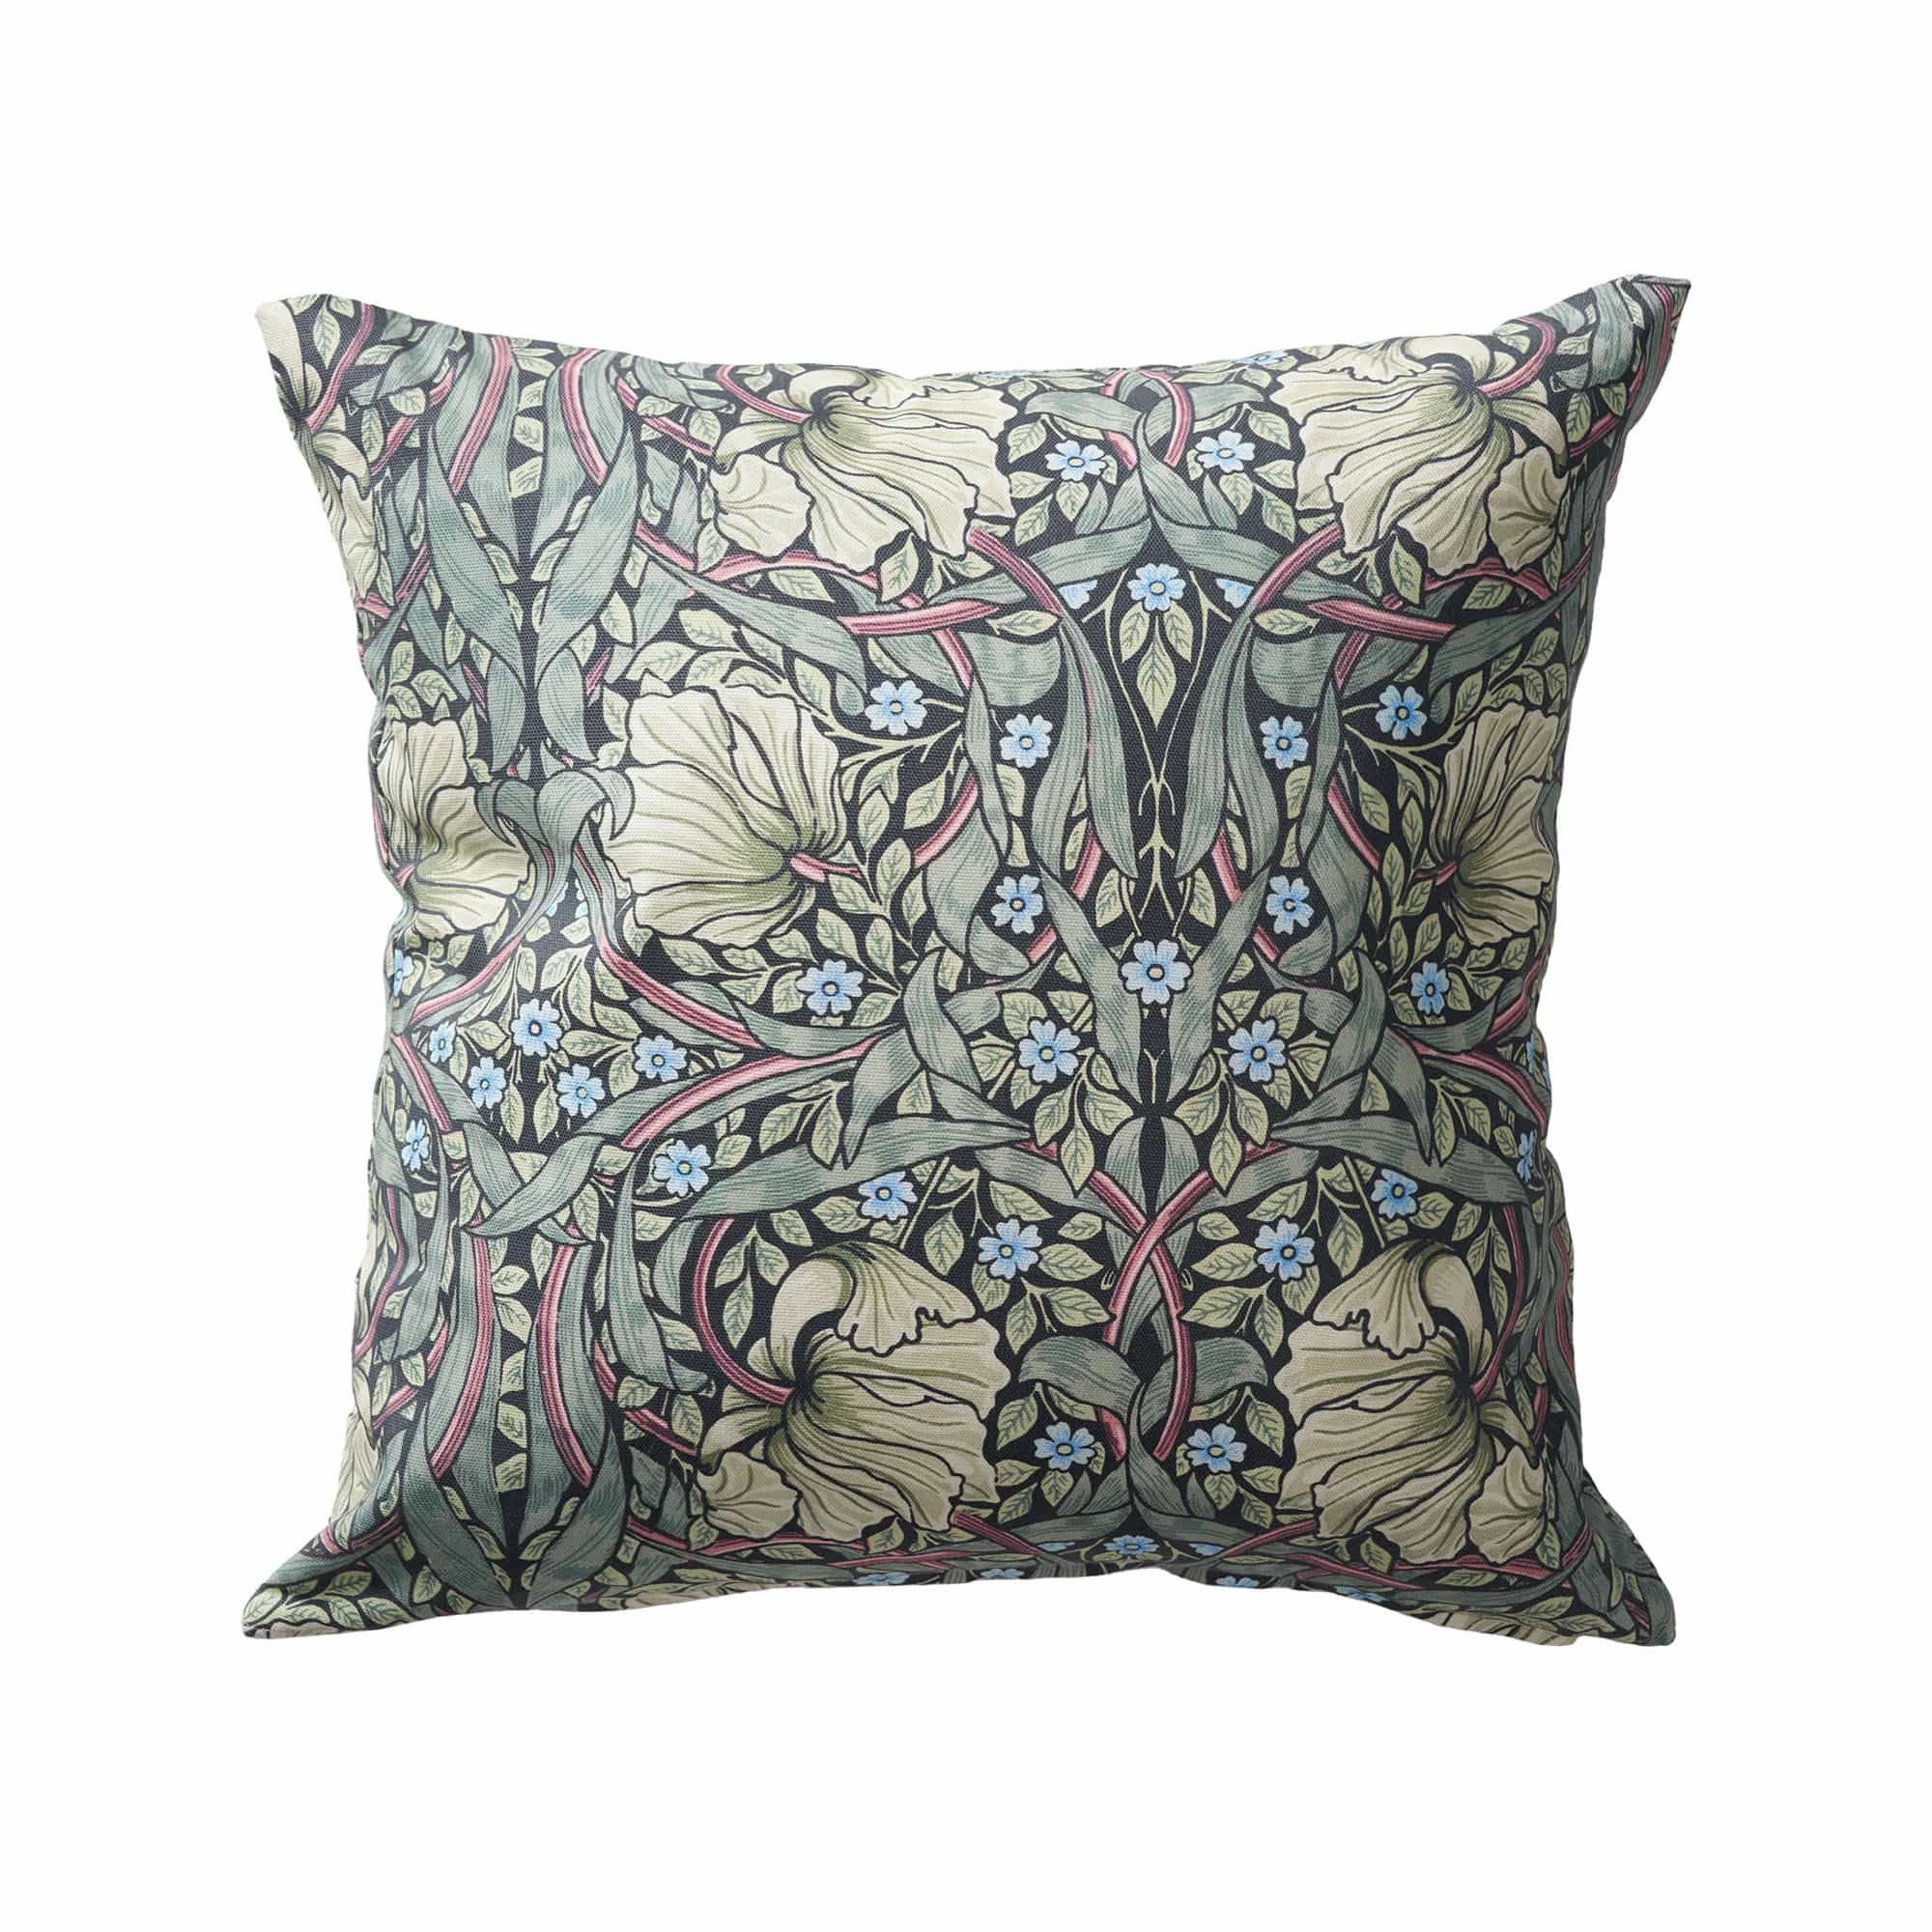 Pimpernel Cushion Cover